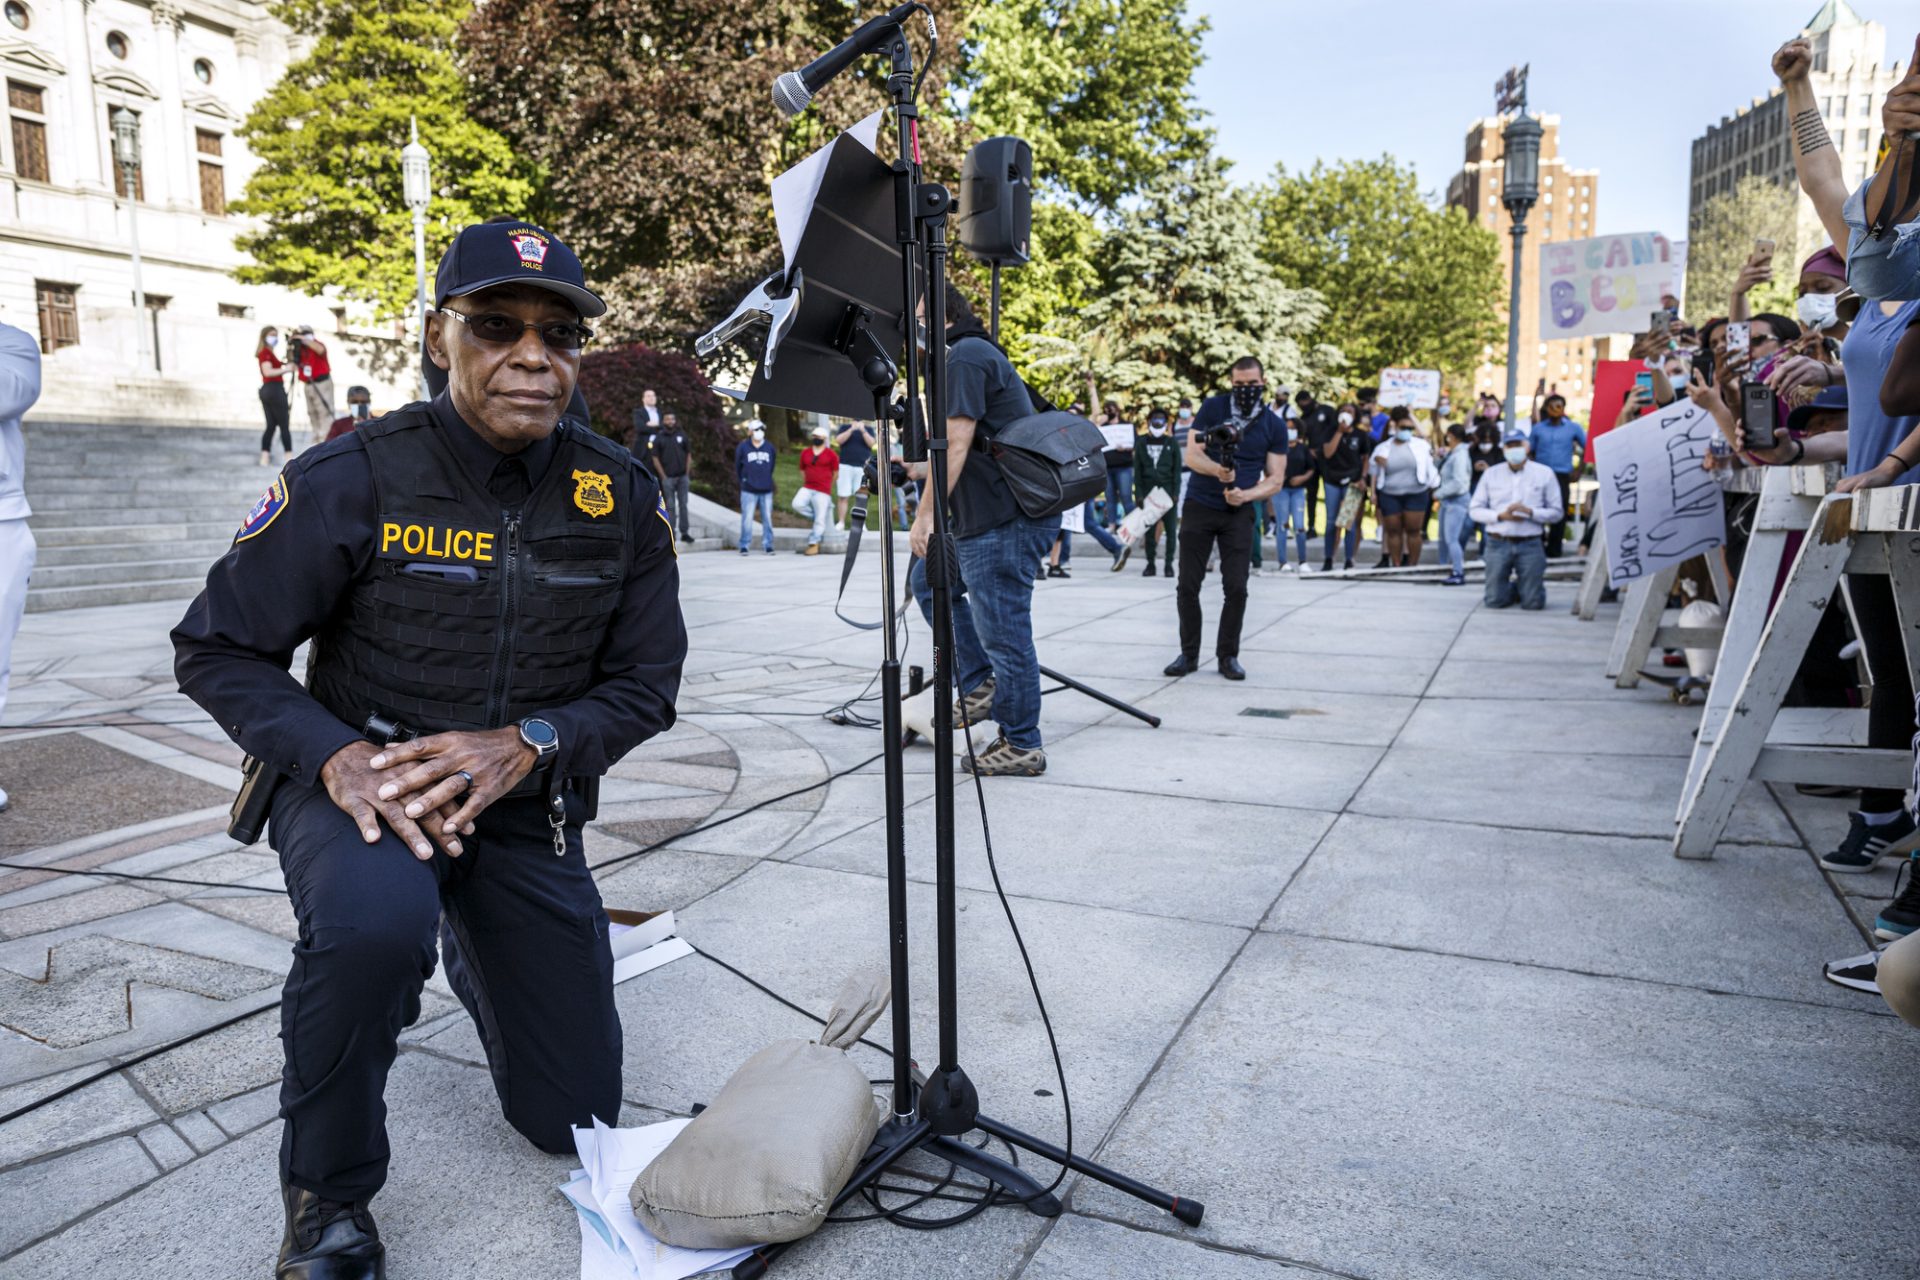 Harrisburg police chief Thomas Carter takes a knee on June 1, 2020, as he apologizes to the crowd for treatment by police at the demonstration two days prior.